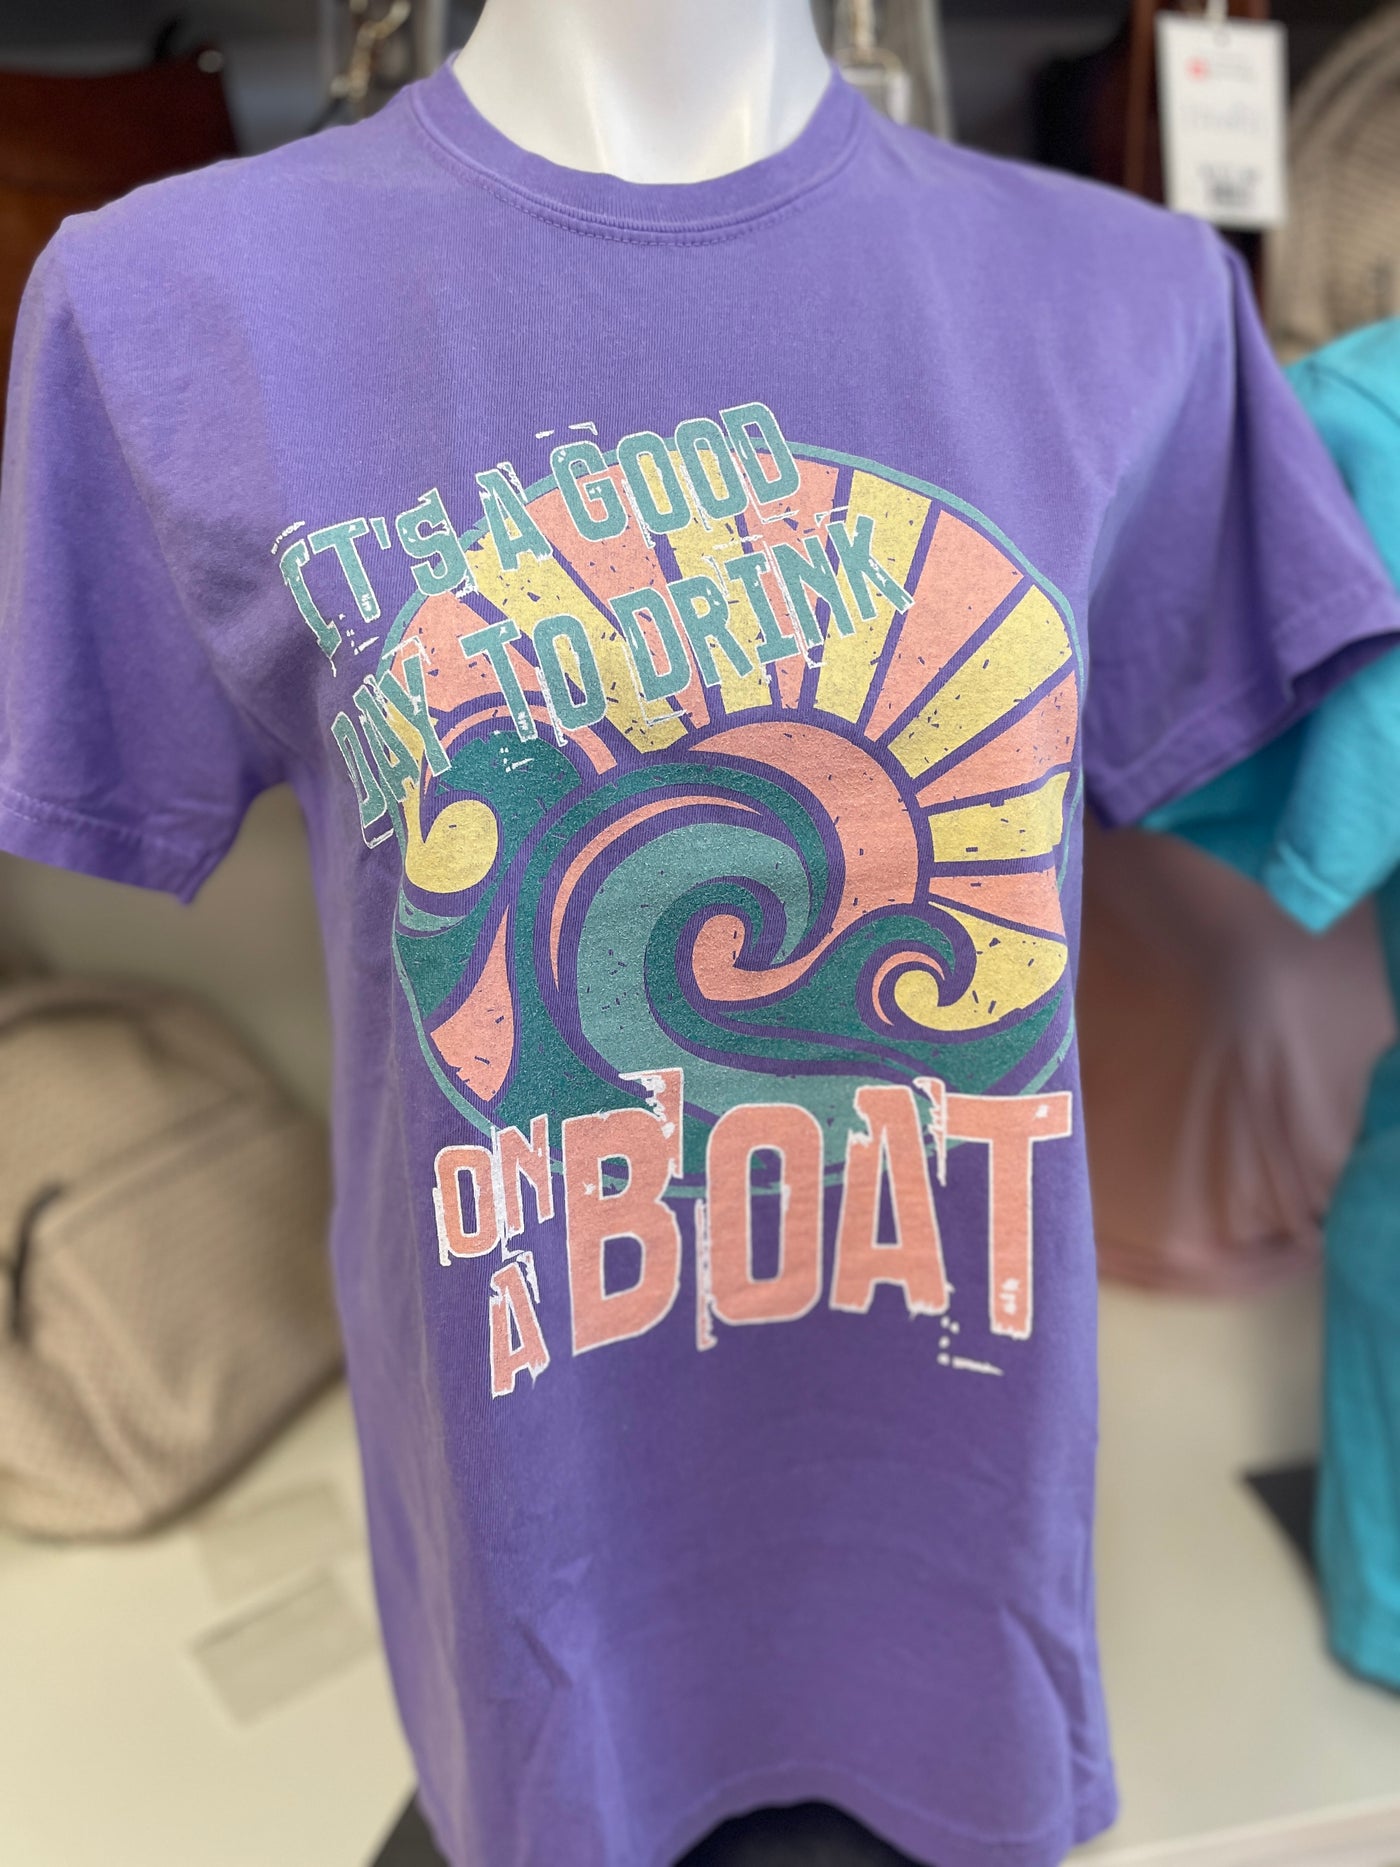 It's A Good Day to Drink on a Boat Tee